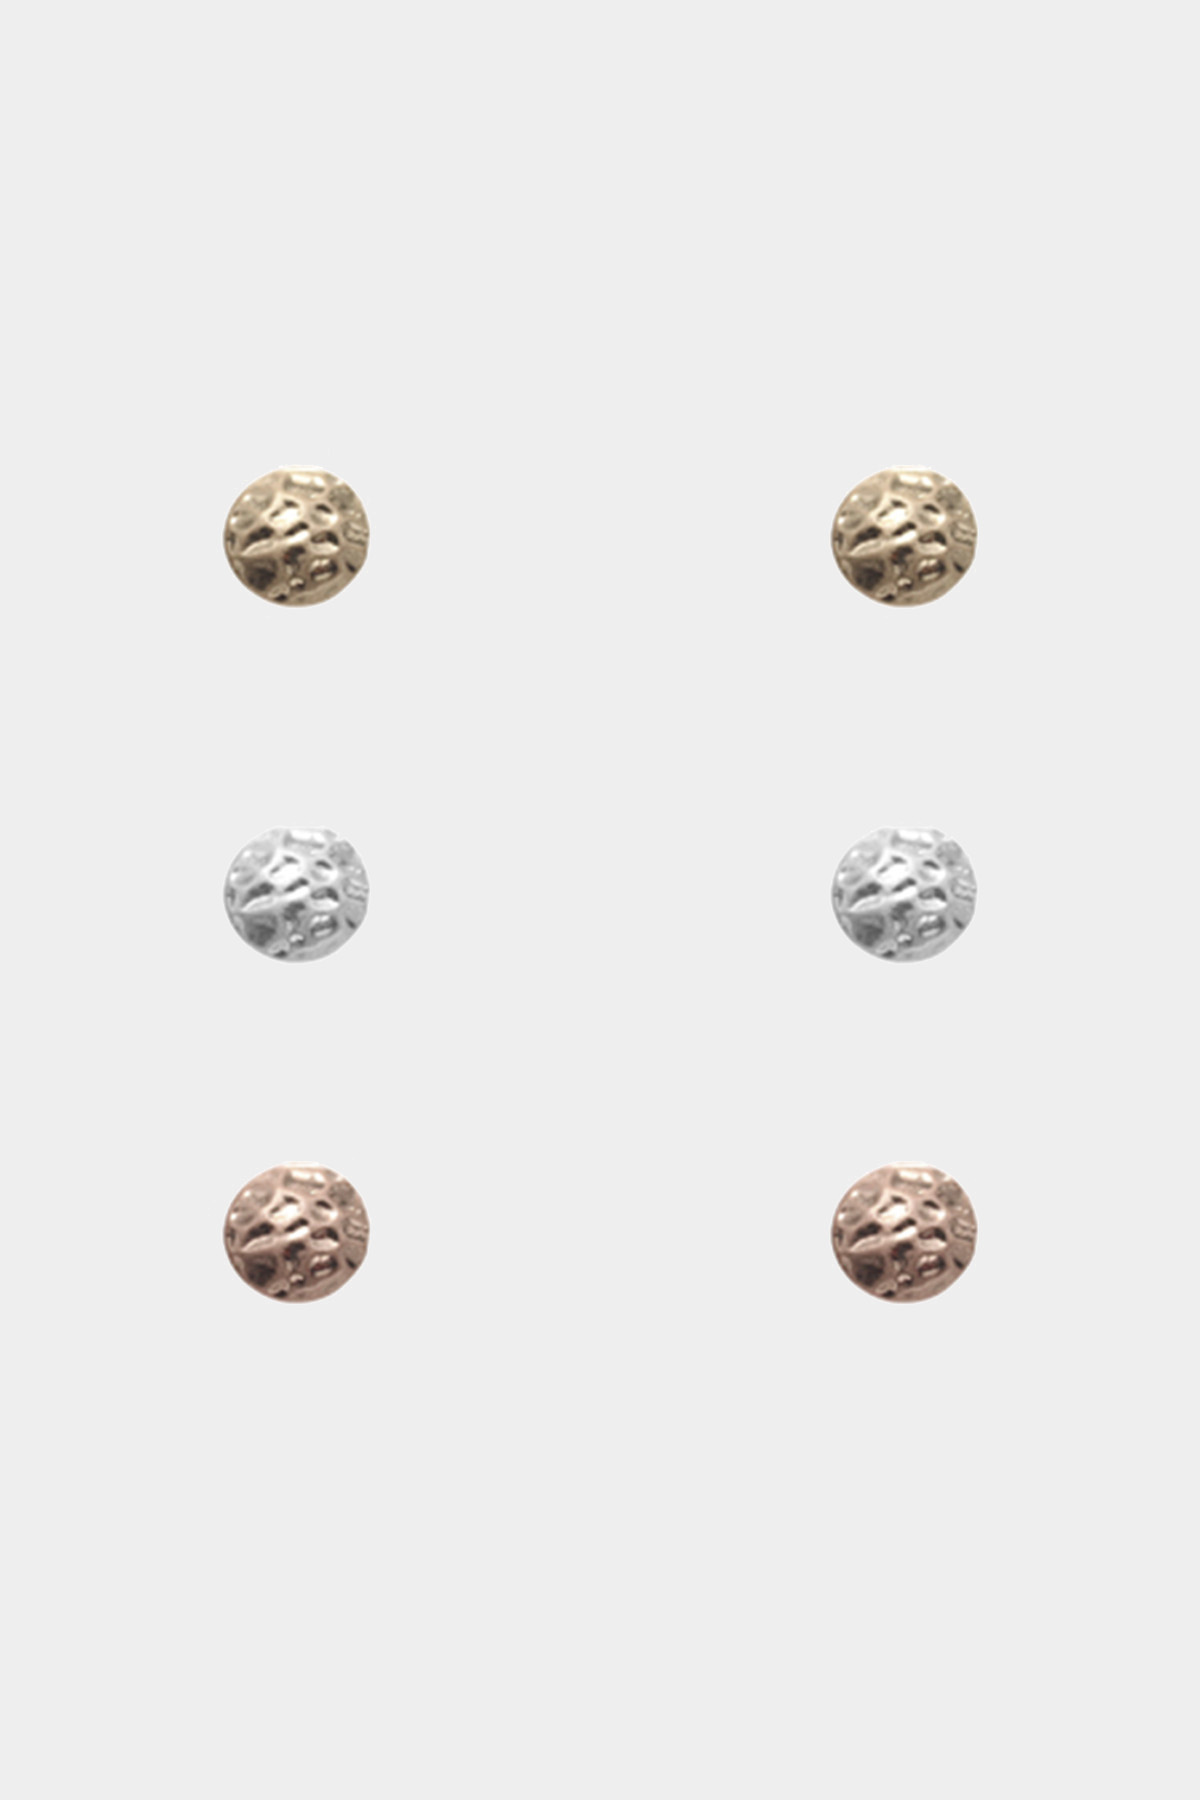 ROUND ASSORTED STUD EARRING SET